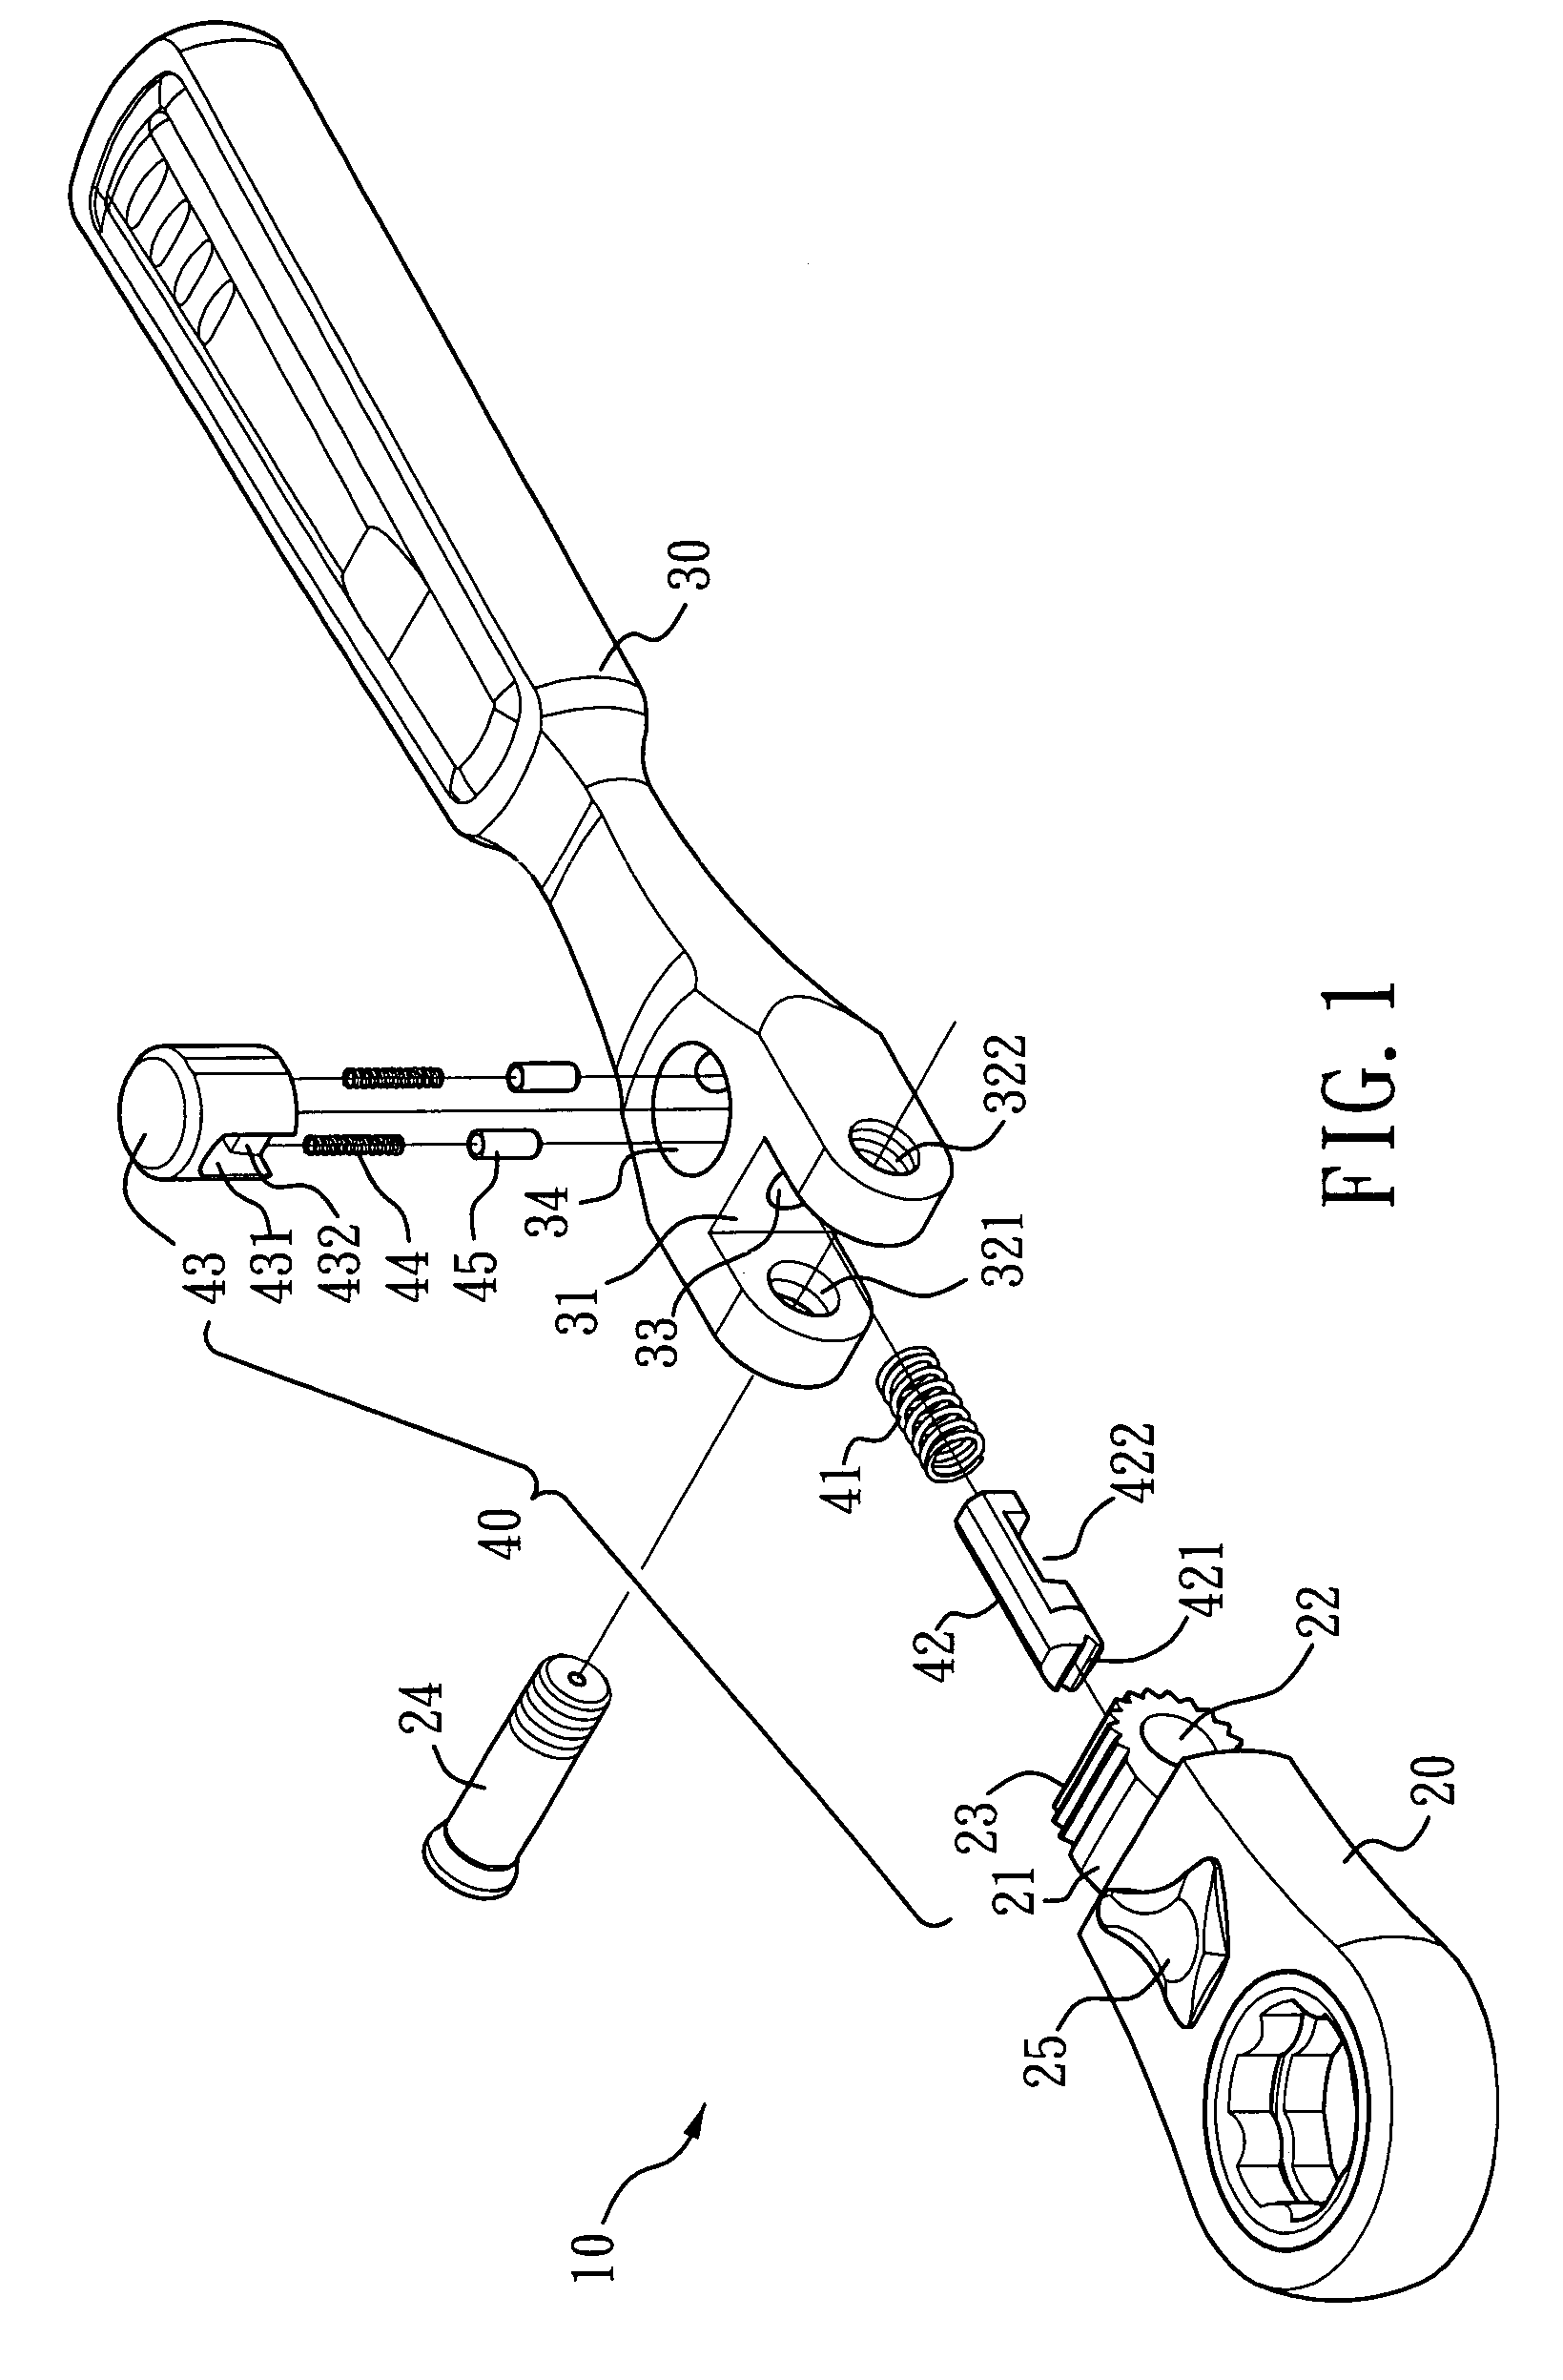 Hand tool having an adjustable head with a joint lock mechanism